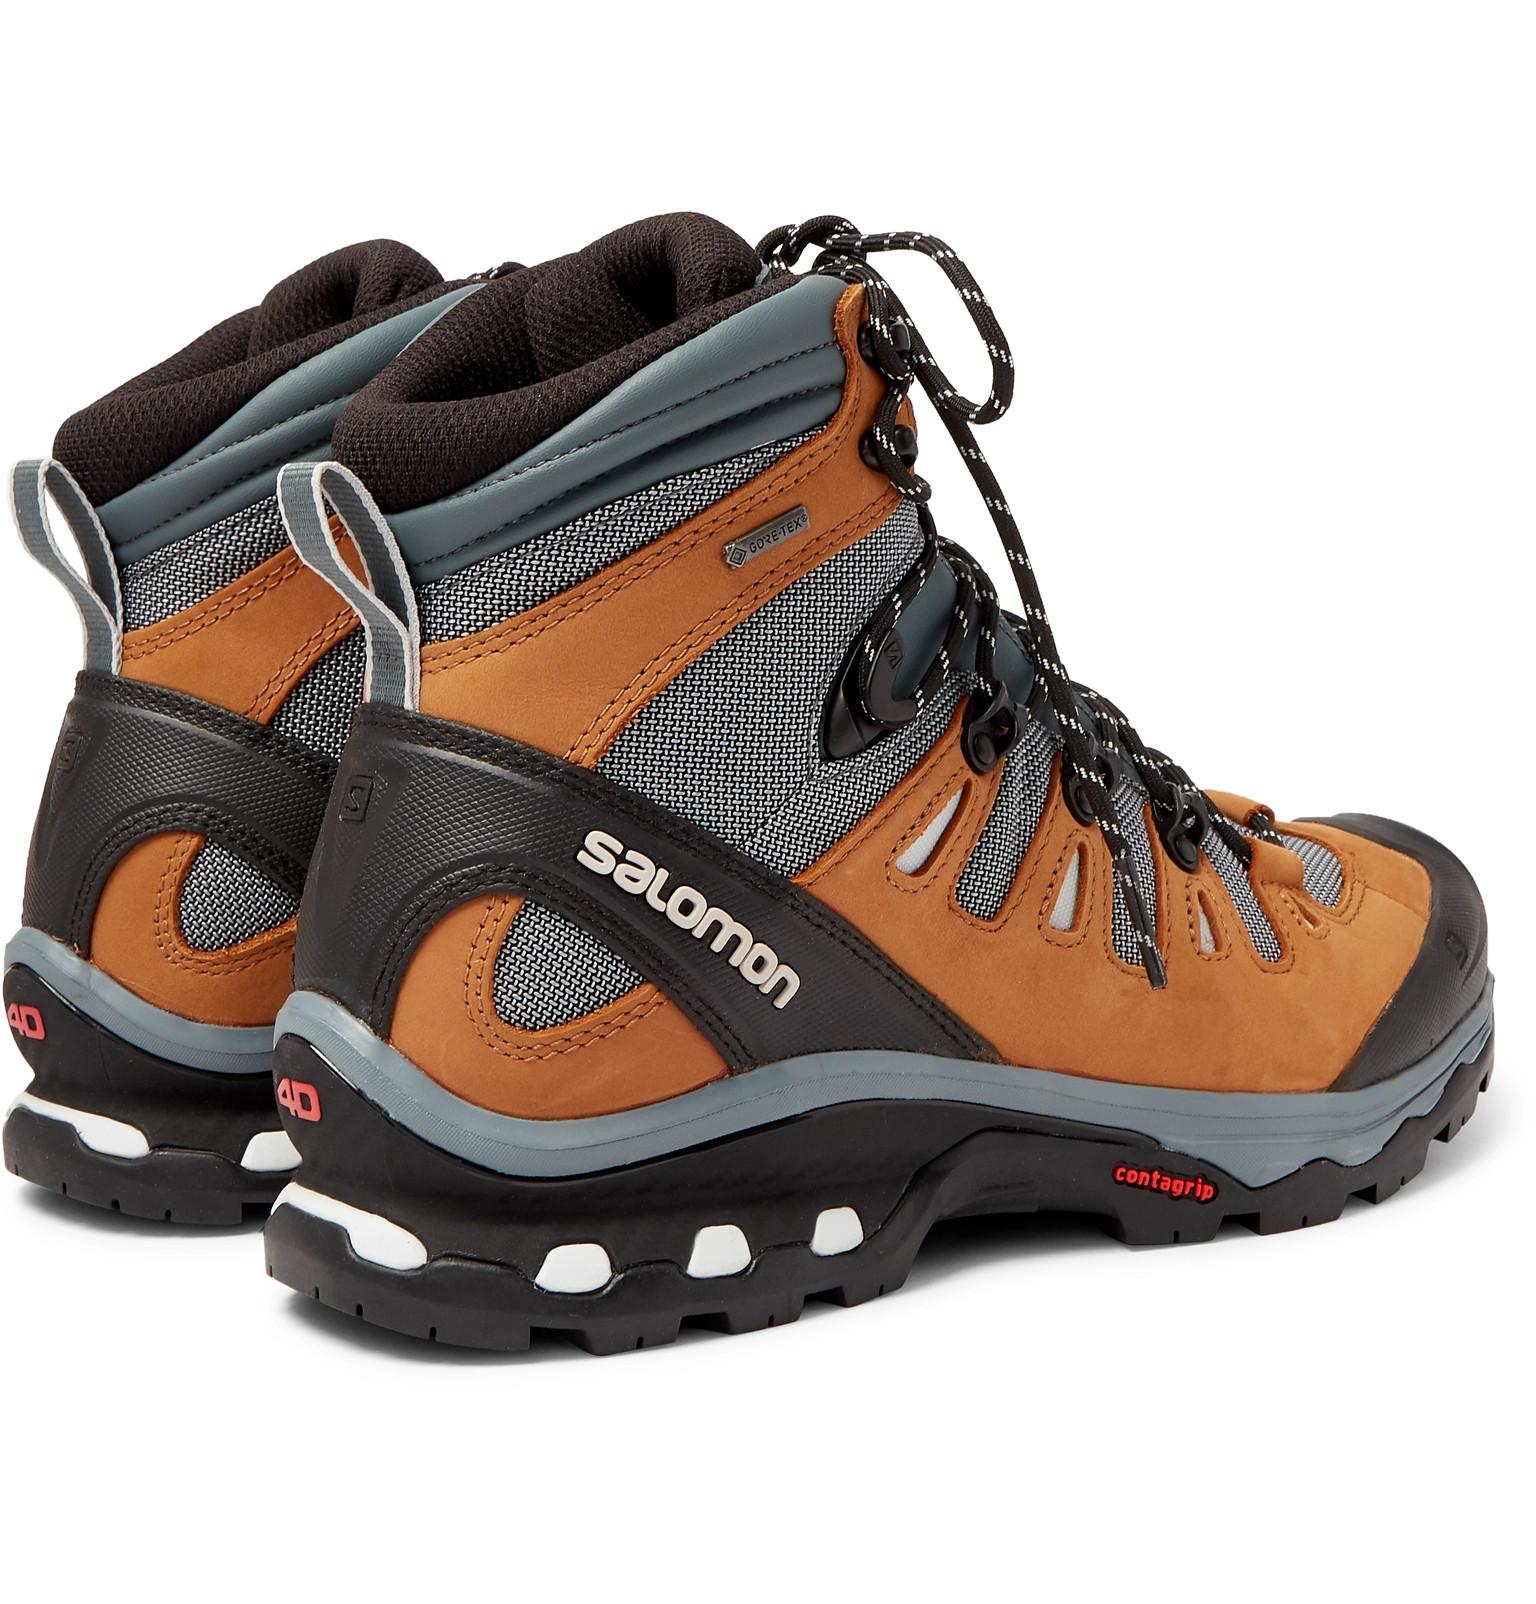 men's quest 4d 3 gtx backpacking boots Promotions